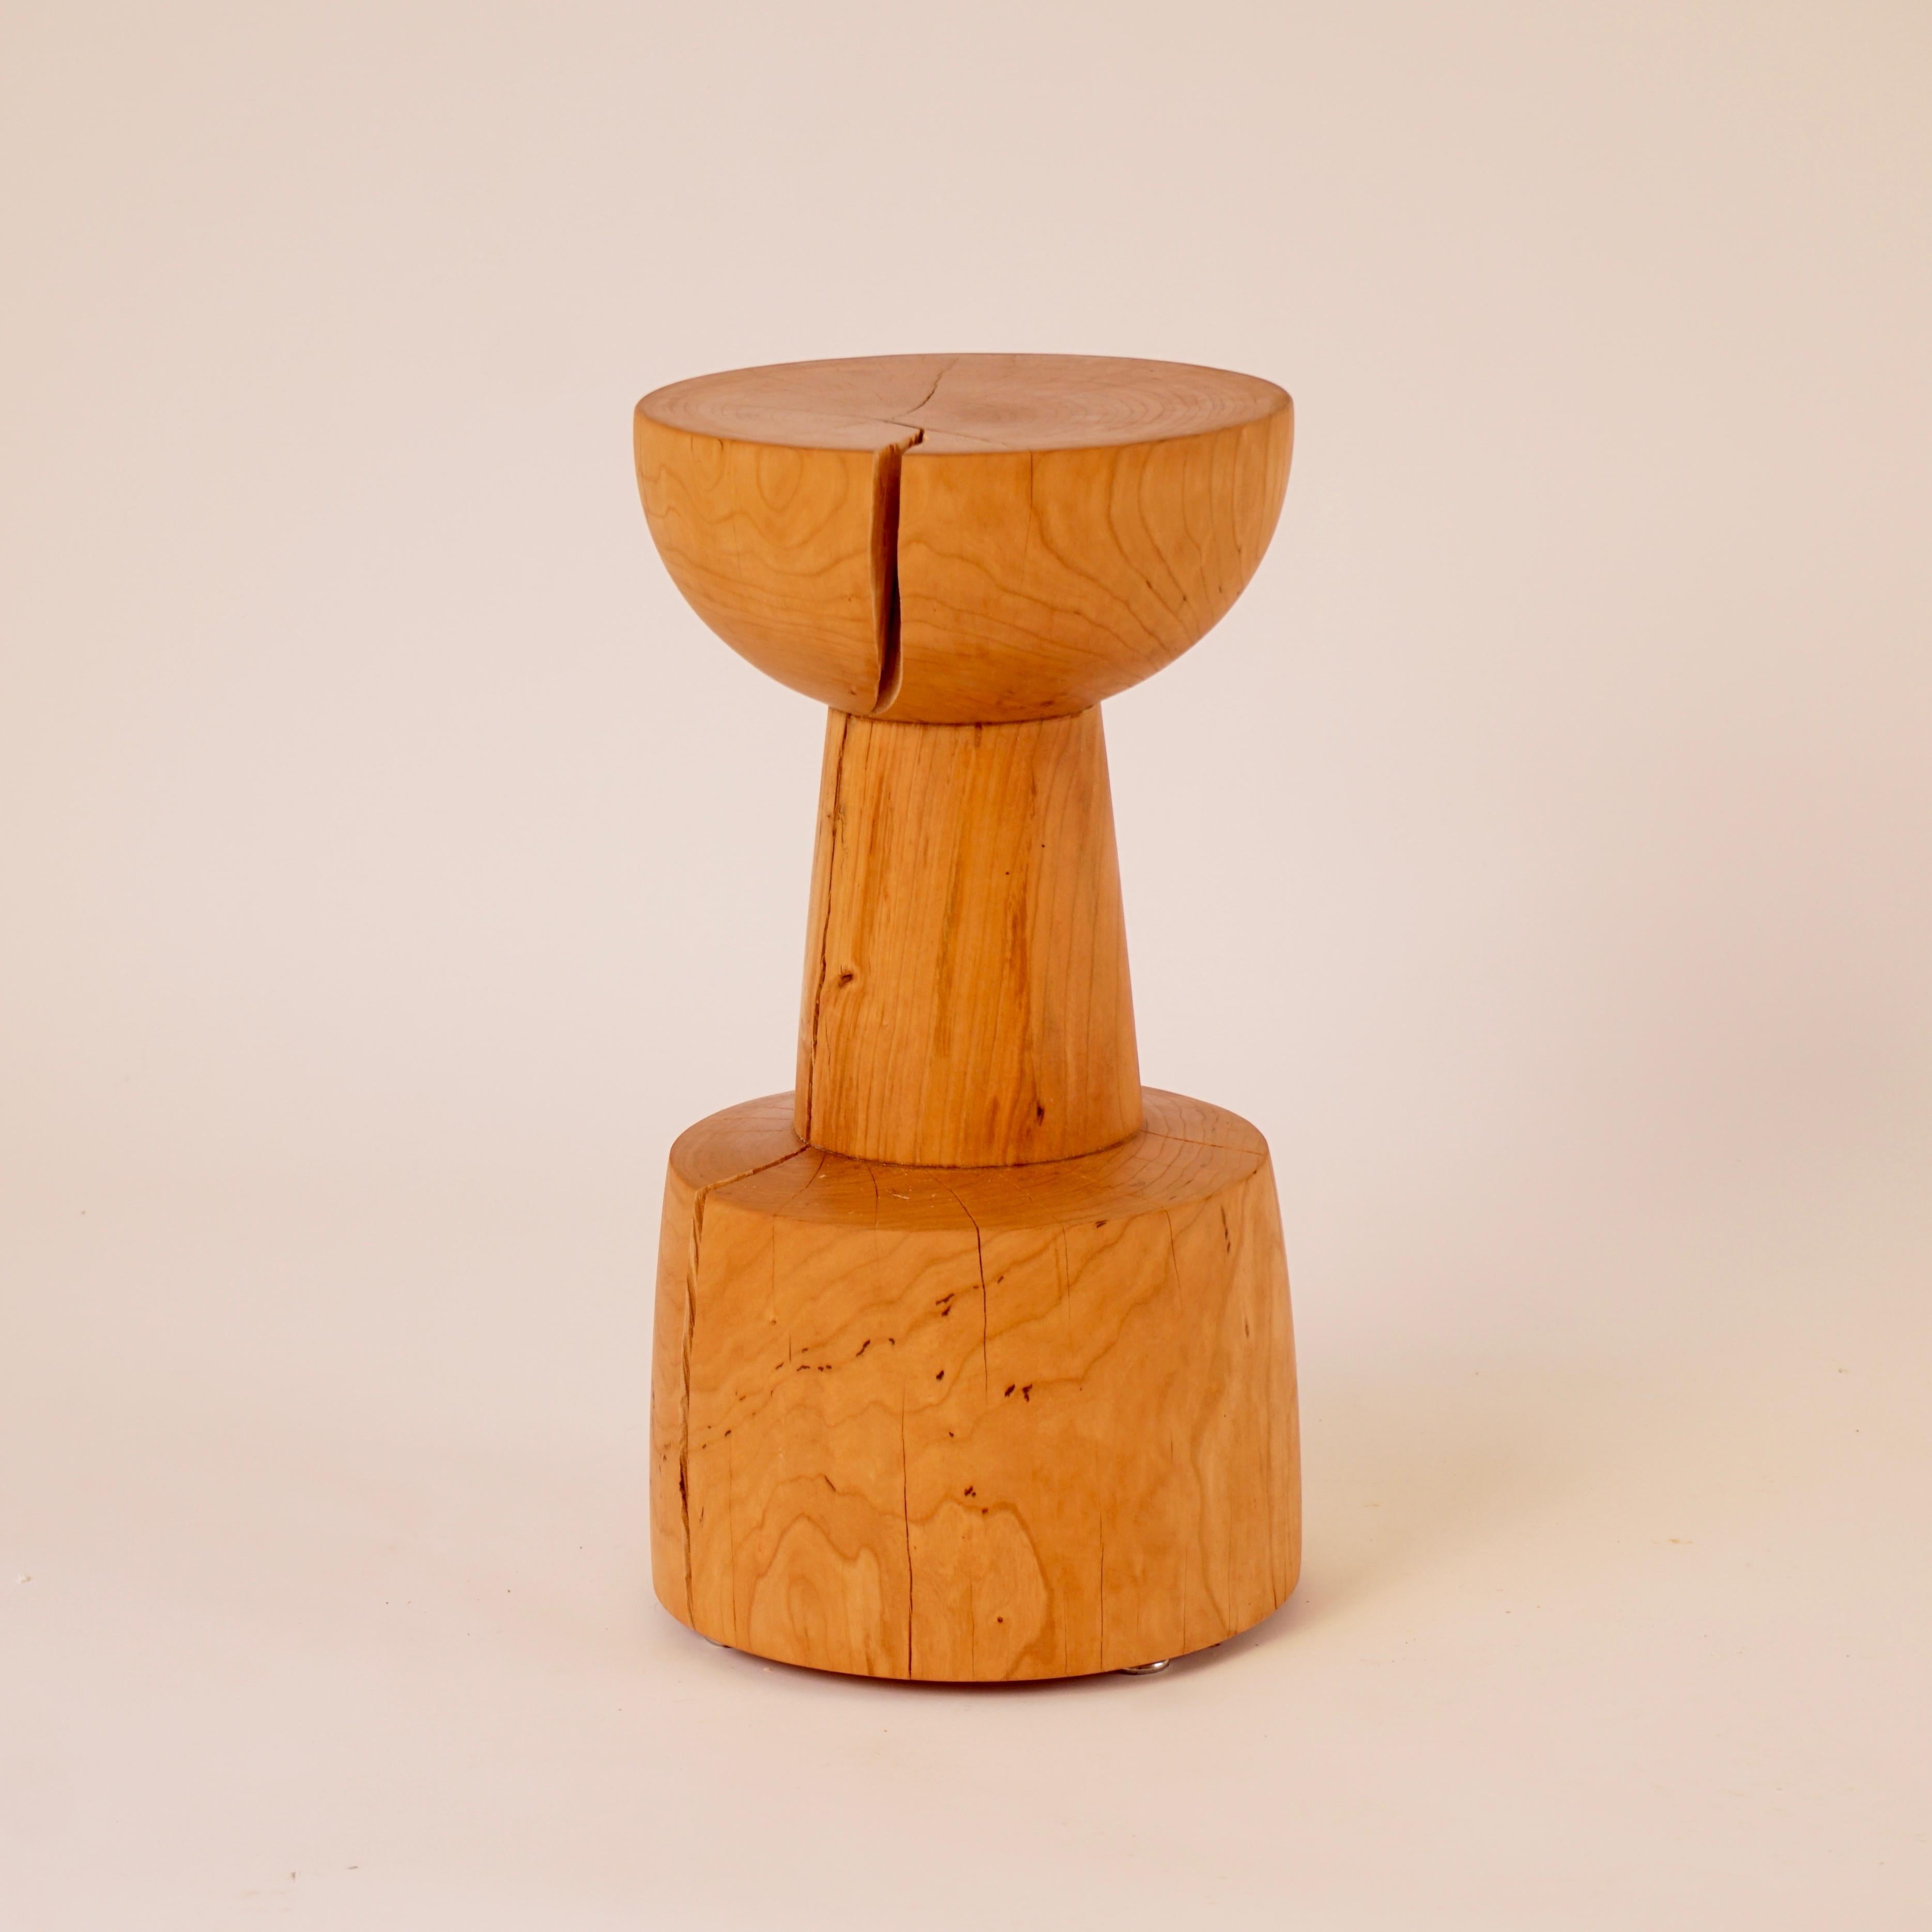 This is a mini version of the #6 Pedestal, one of the ten original shapes in the Lehrecke Pedestal collection from 1996, is made from a beautiful cherry log, from the Hudson Valley, in New York State.

All of Lehrecke's Pedestals are made on a